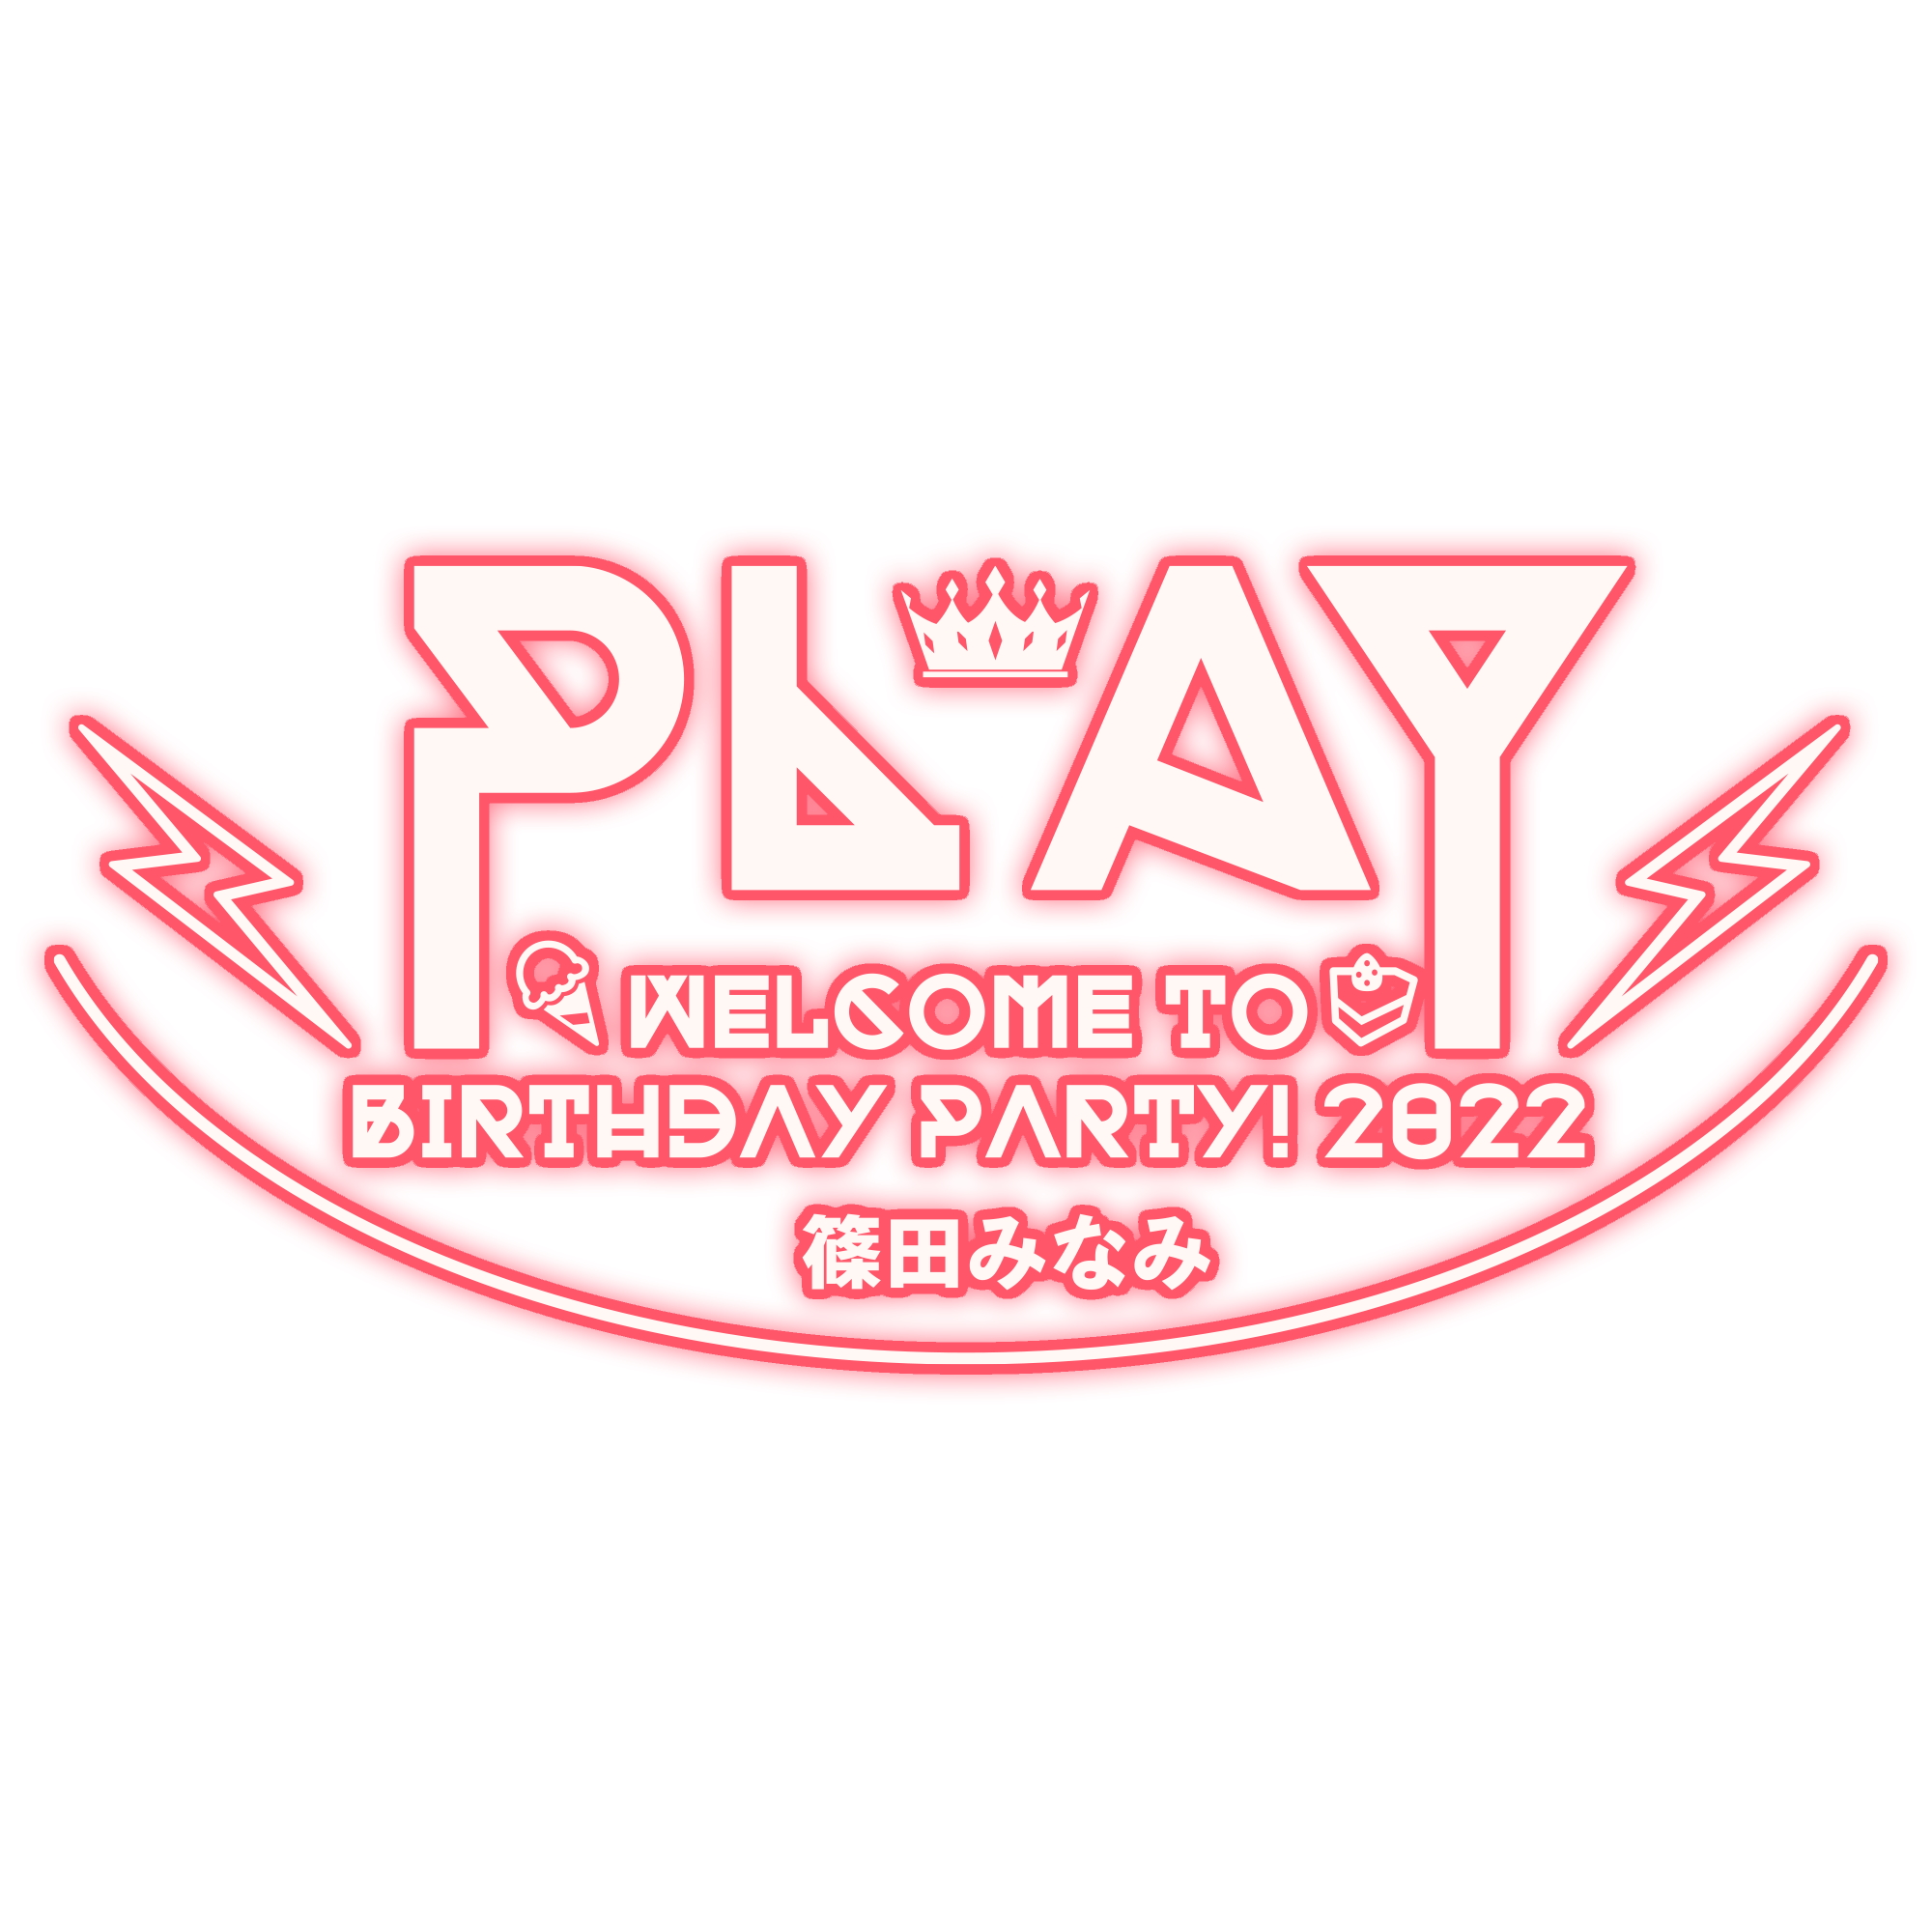 ～ PLAY！～  ー 篠田みなみ　Welcome to  Birthday Party！2022 ー